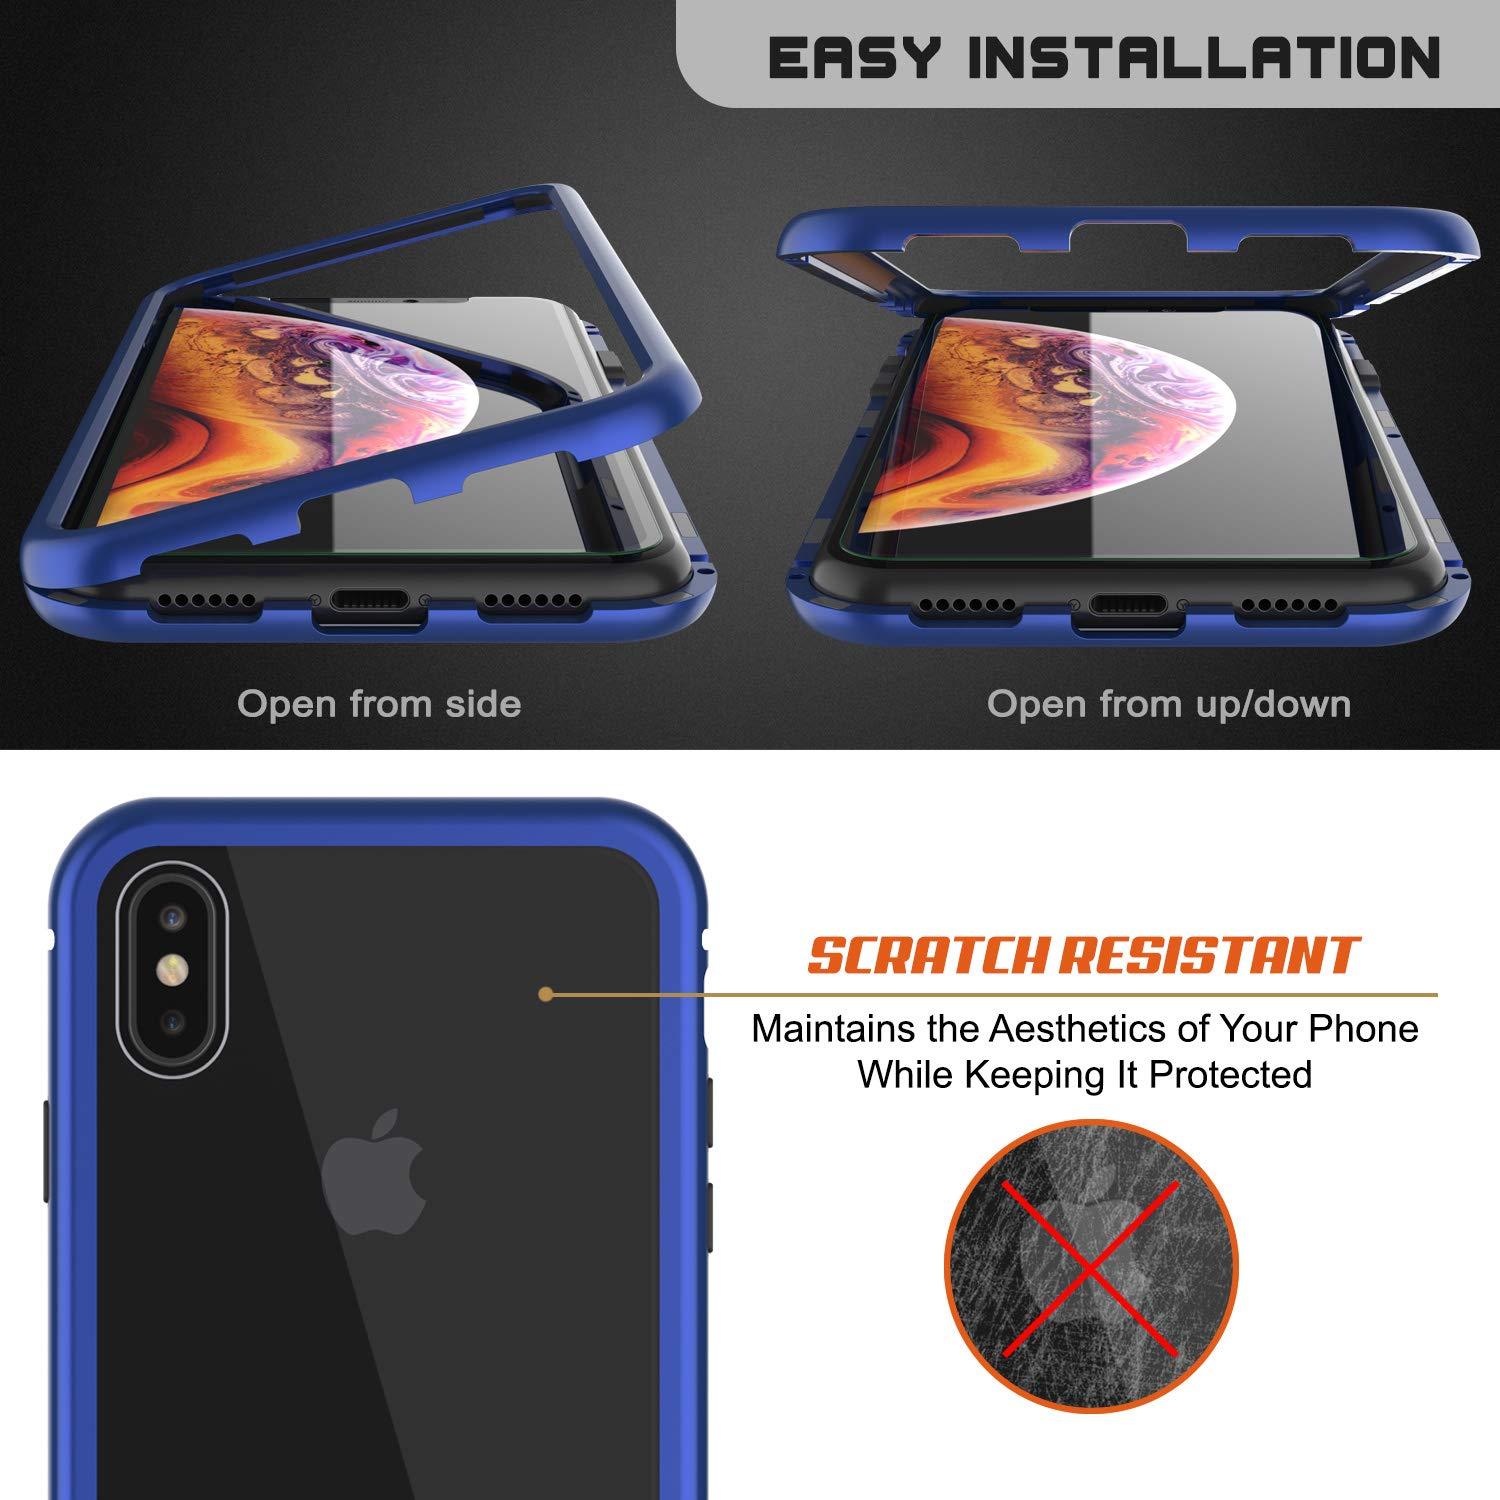 iPhone XS Max Case, Punkcase Magnetic Shield Protective TPU Cover W/ Tempered Glass Screen Protector [Blue]